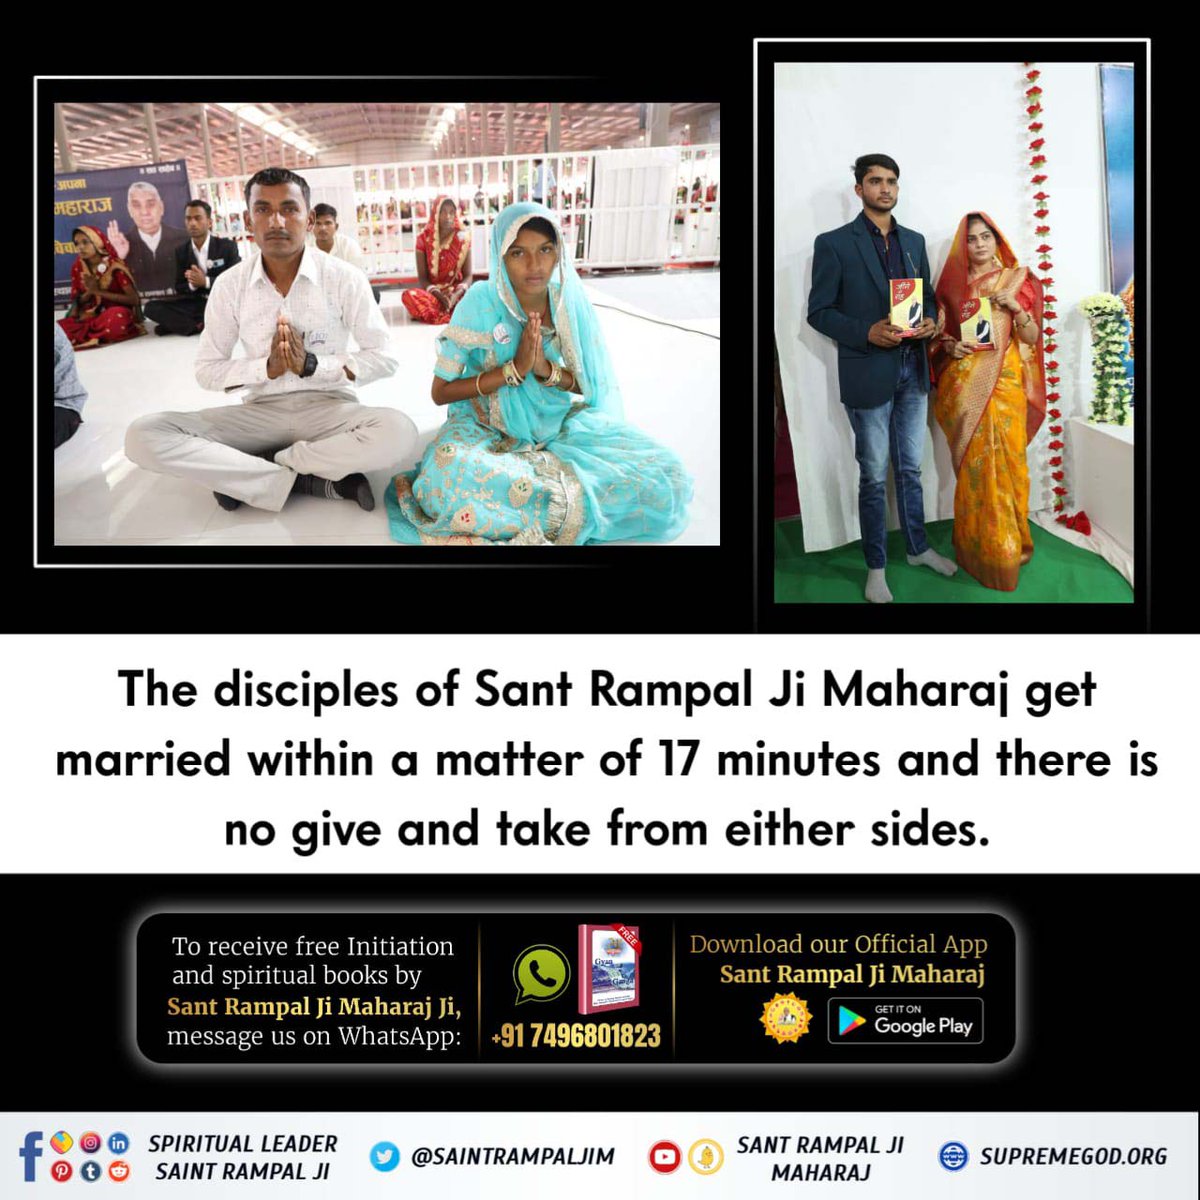 #दहेज_मुक्त_विवाह
The disciples of Sant Rampal Ji Maharaj get married within a matter of 17 minutes and there is no give and take from either sides.

Marriage In 17 Minutes

Visit 👉   JagatGuruRampalJi.org